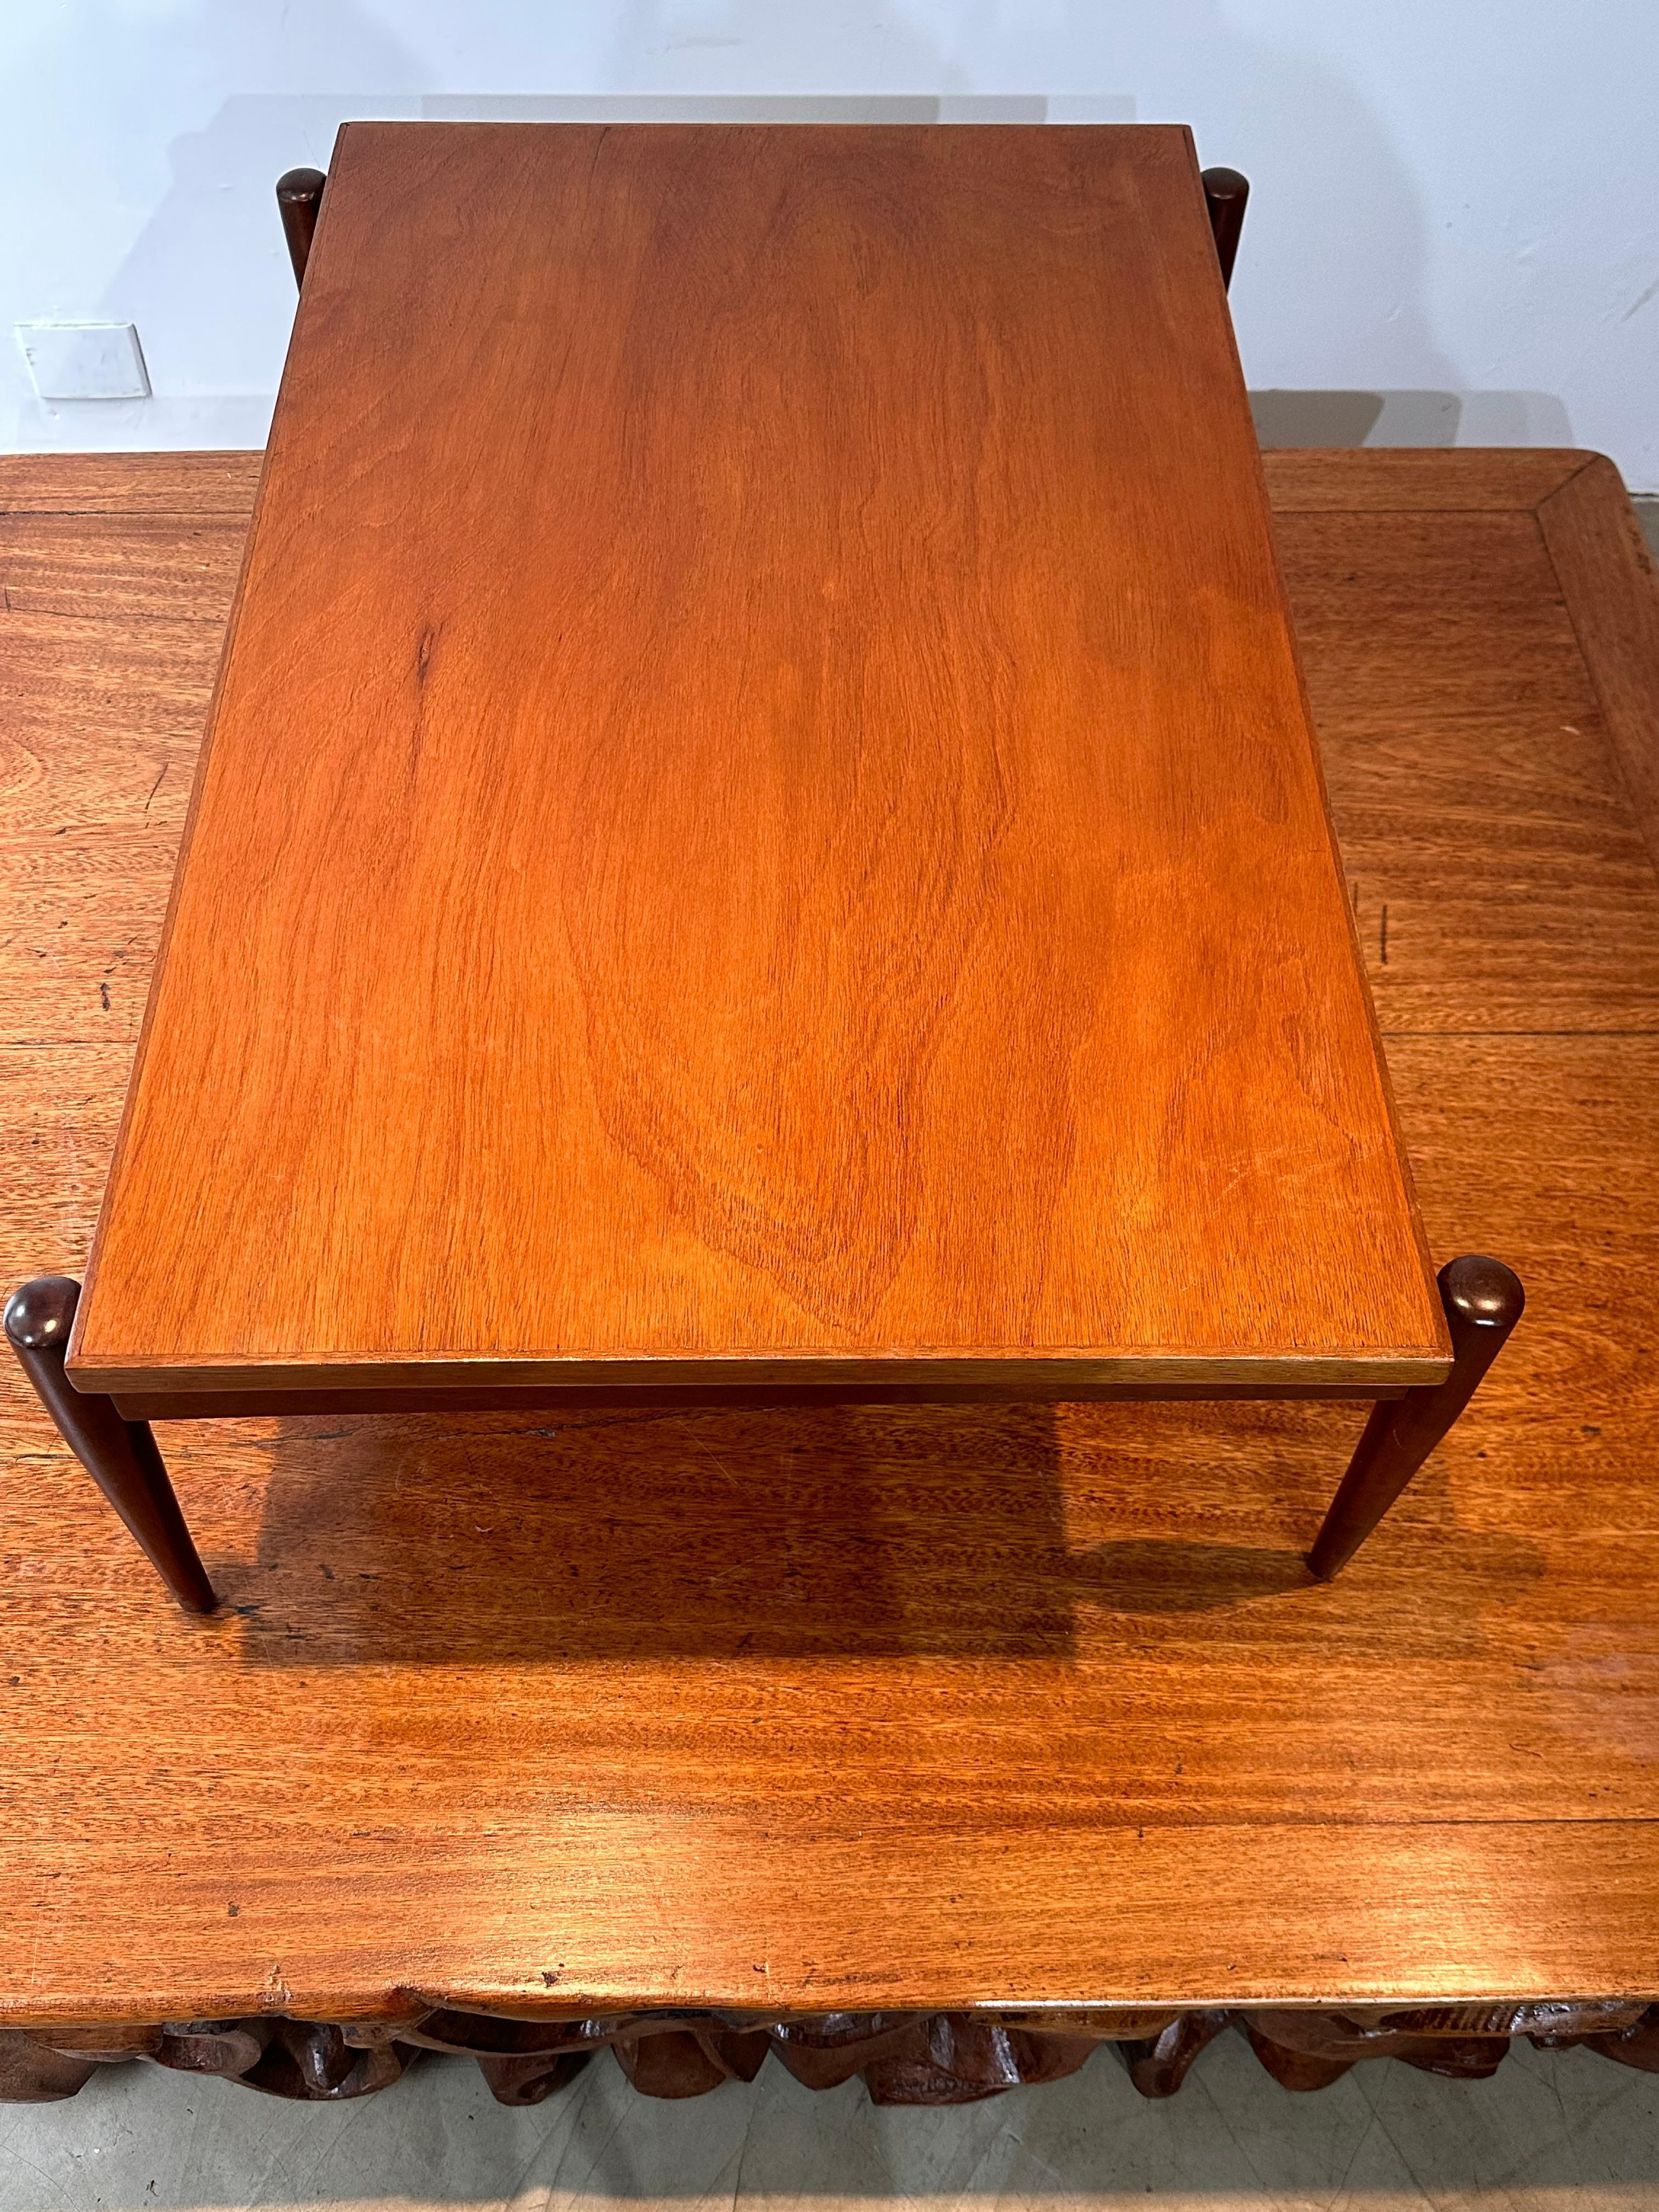 Extremely charming 1950's center table created and sold by Galeria Ambiente. This art and design gallery was at the forefront of the artistic and cultural manifestations of São Paulo at the 1950's and 60's. It promoted interior design projects and